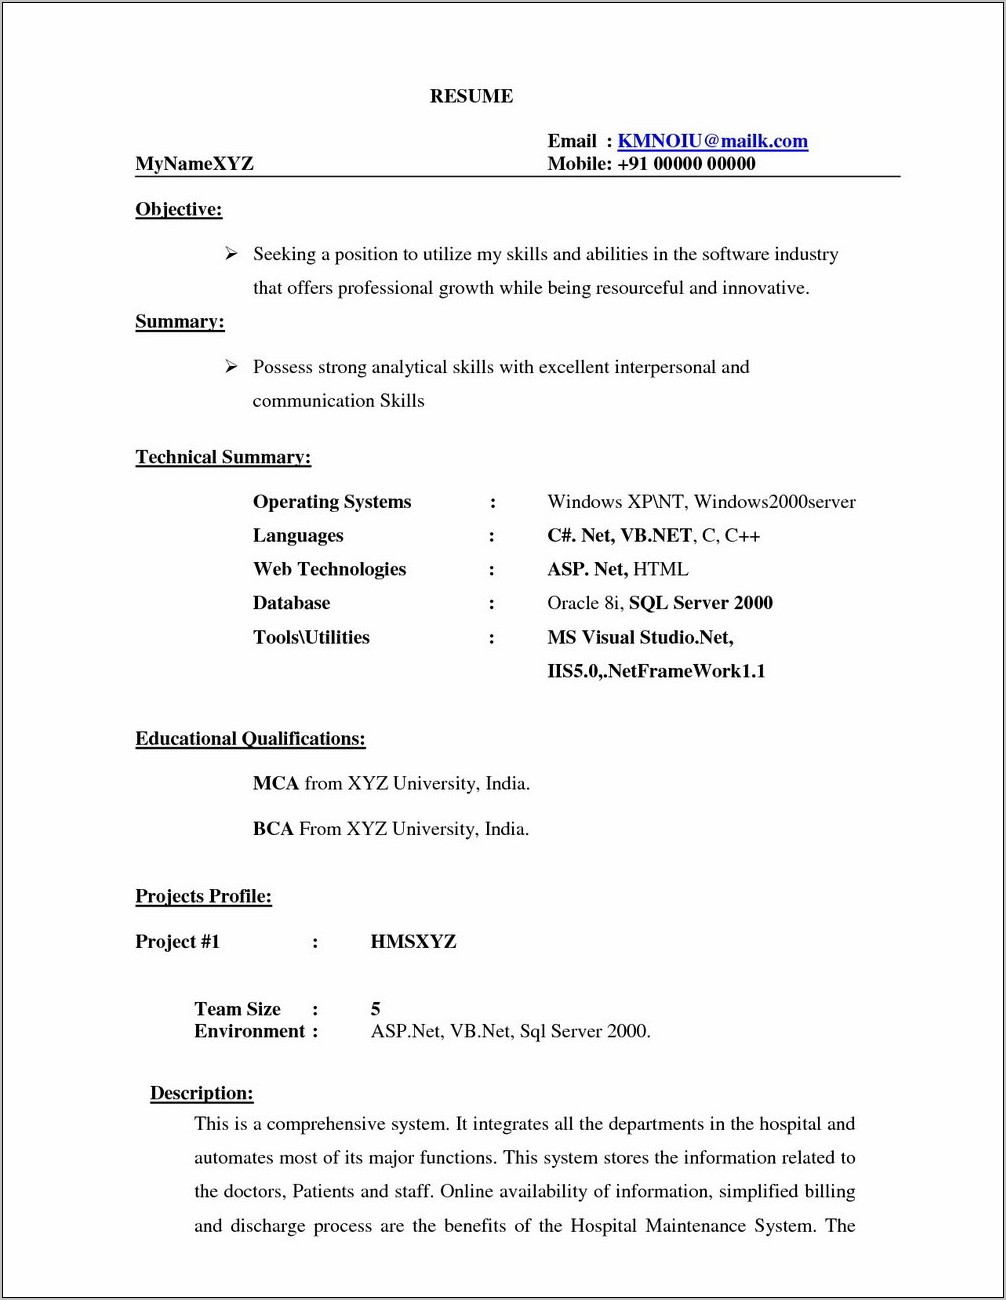 Resume Format Pdf Download For Freshers India